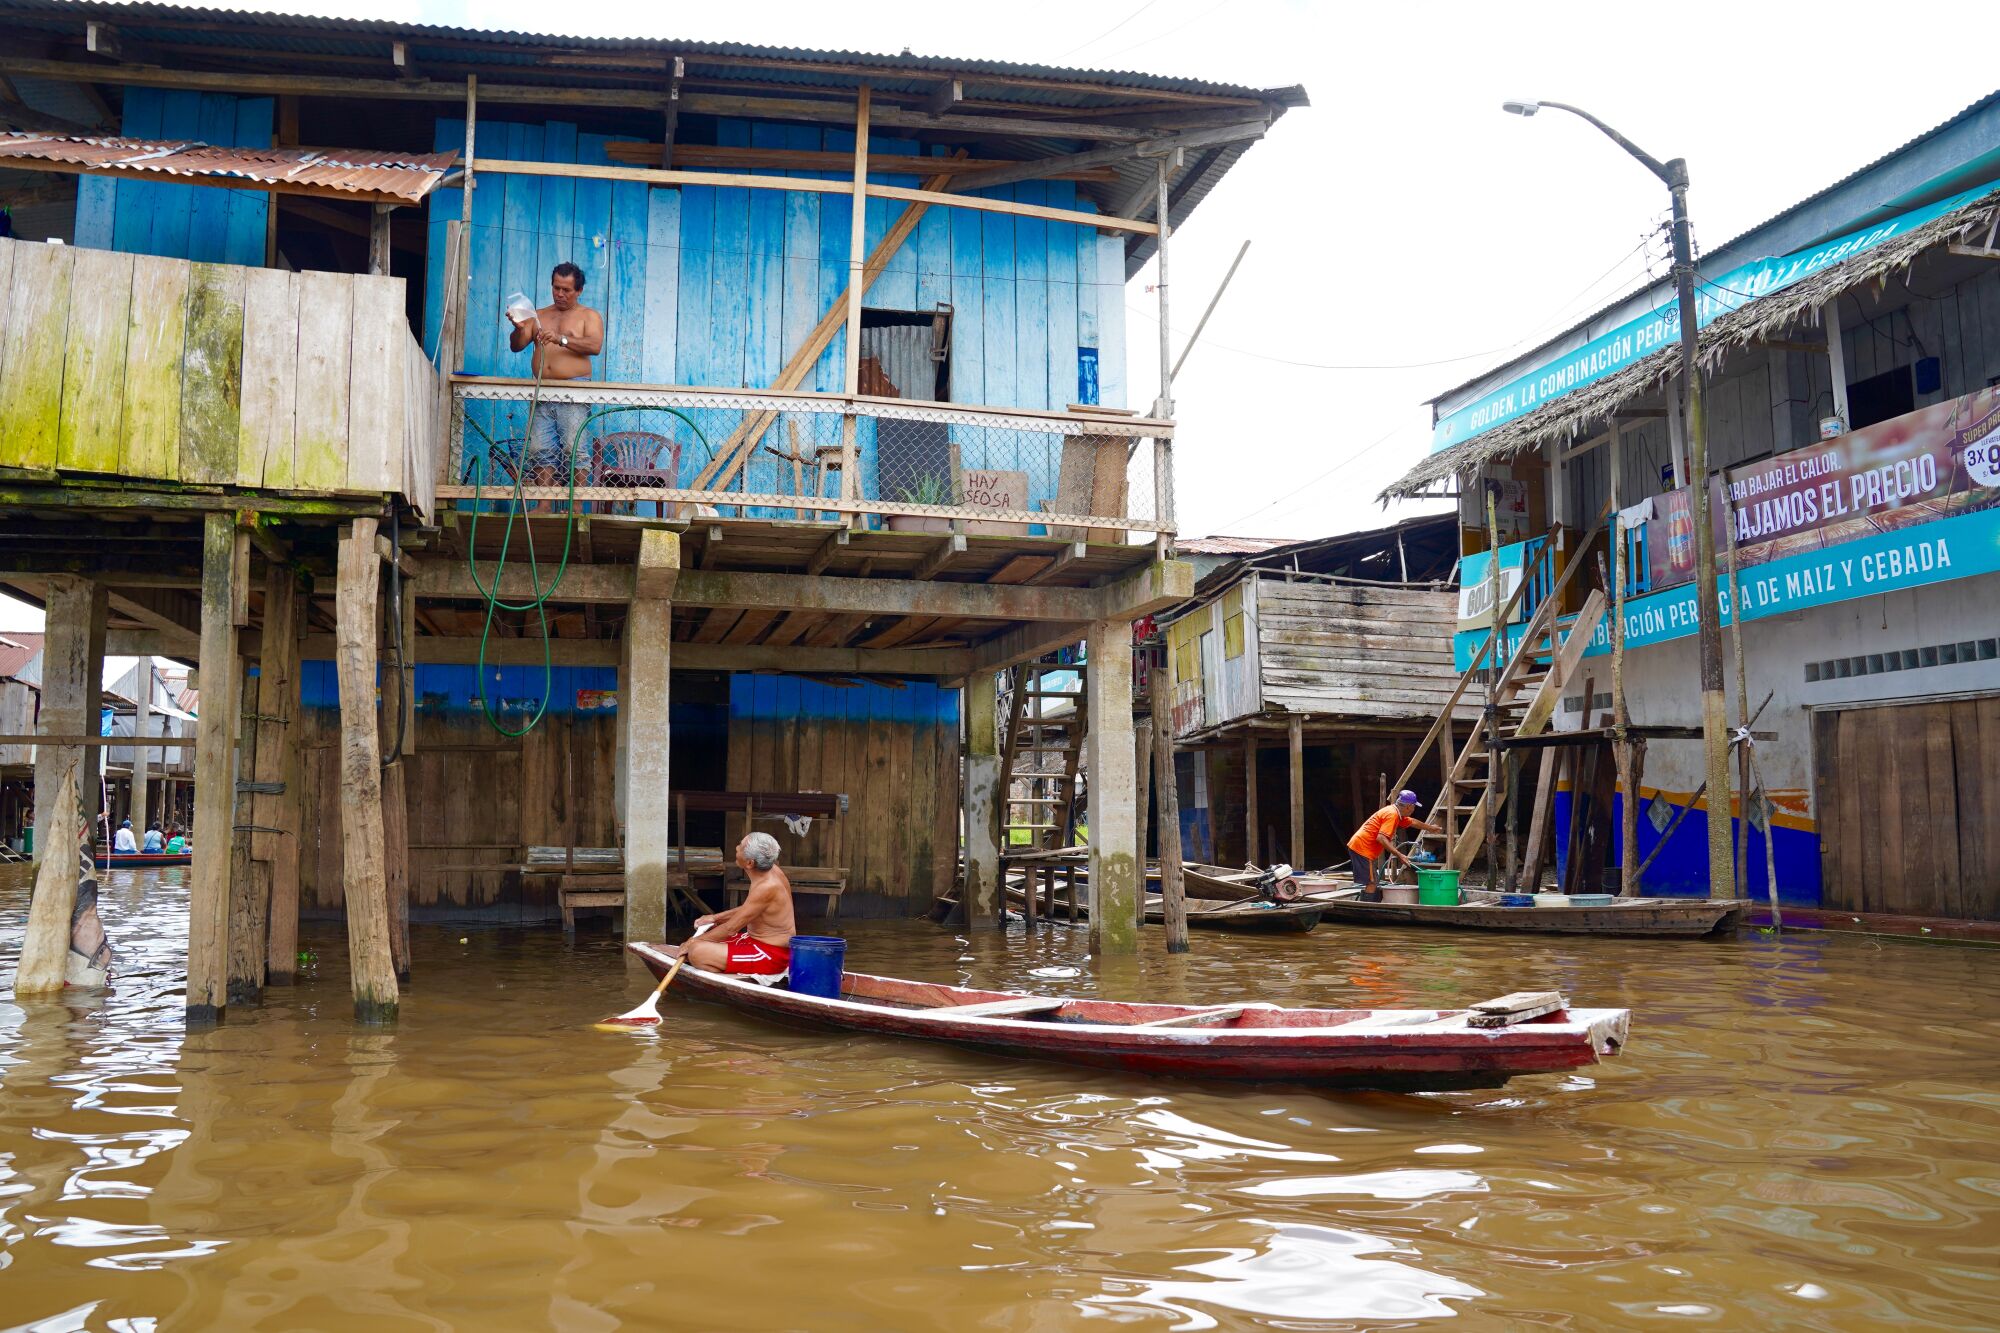 Houses are built on stilts in the Amazon River port of Belen in Iquitos, Peru.